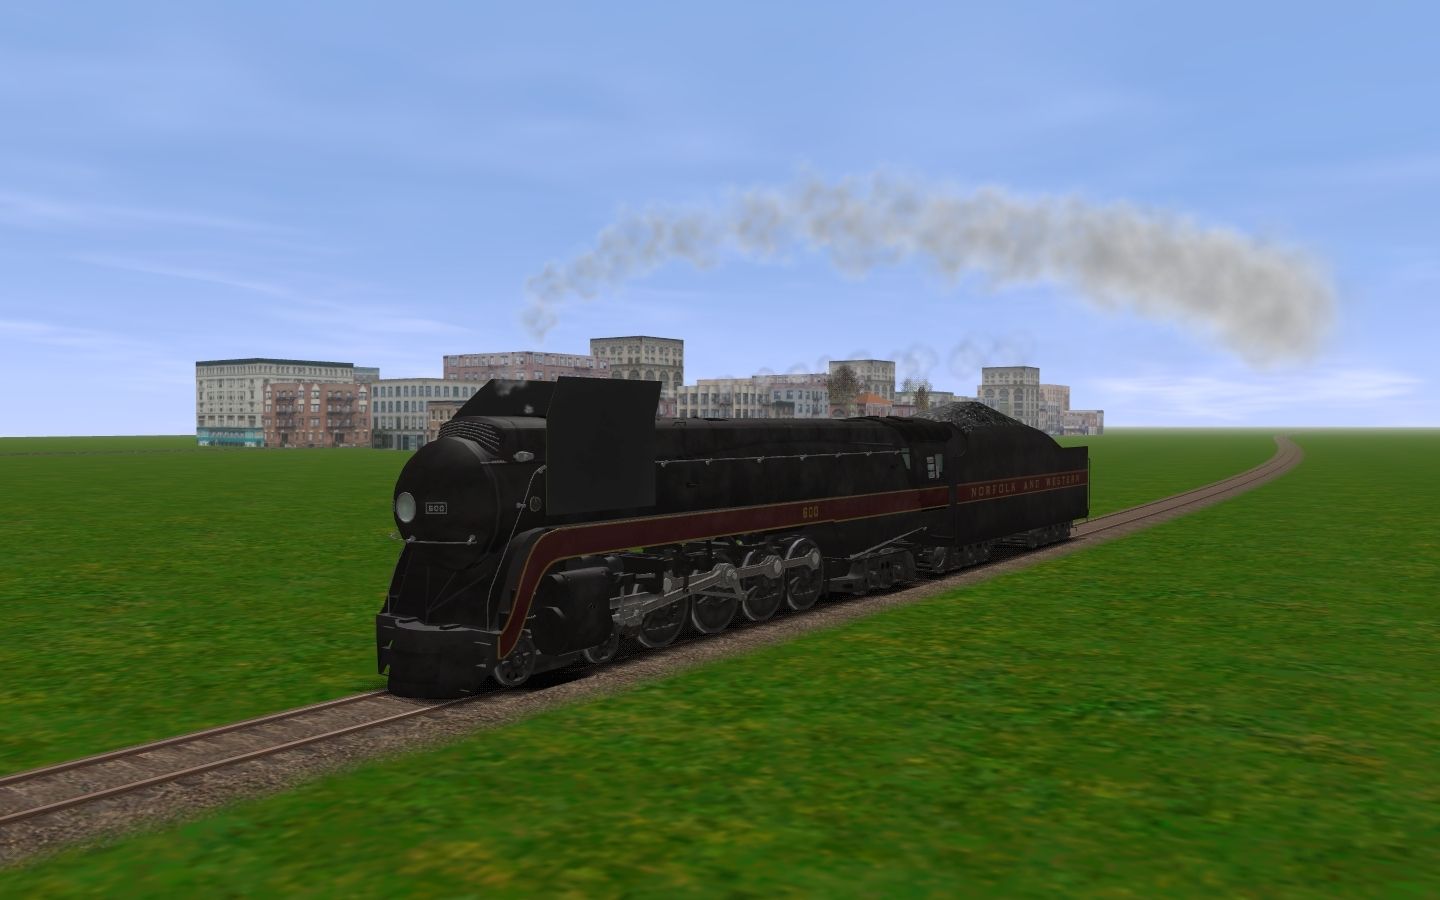 My-first-steam-locomotive-kitbash-for-Trainz.-It%27s-a-fictional-N%26W-J-class-with-deflectors..jpg